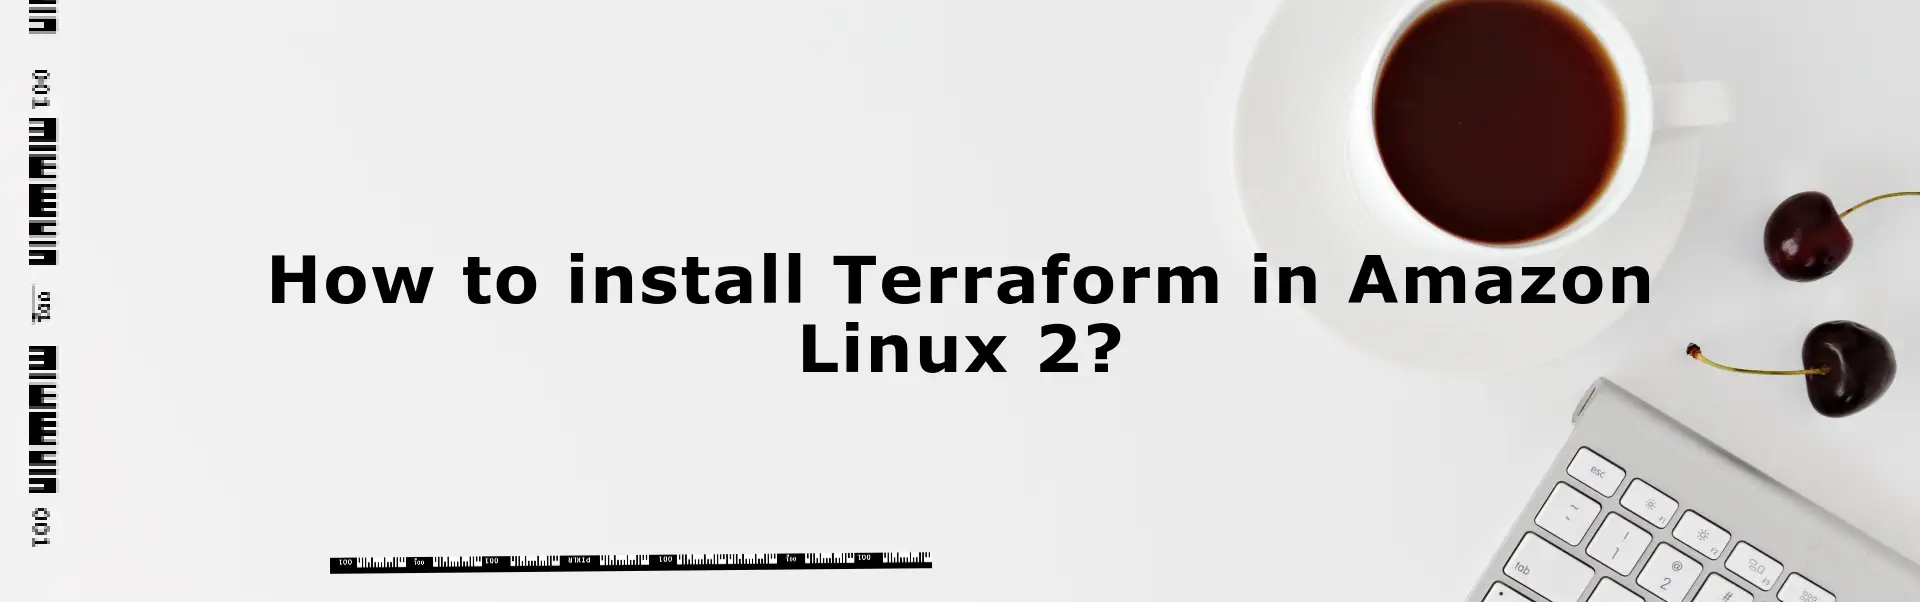 How to install Terraform in Amazon Linux 2